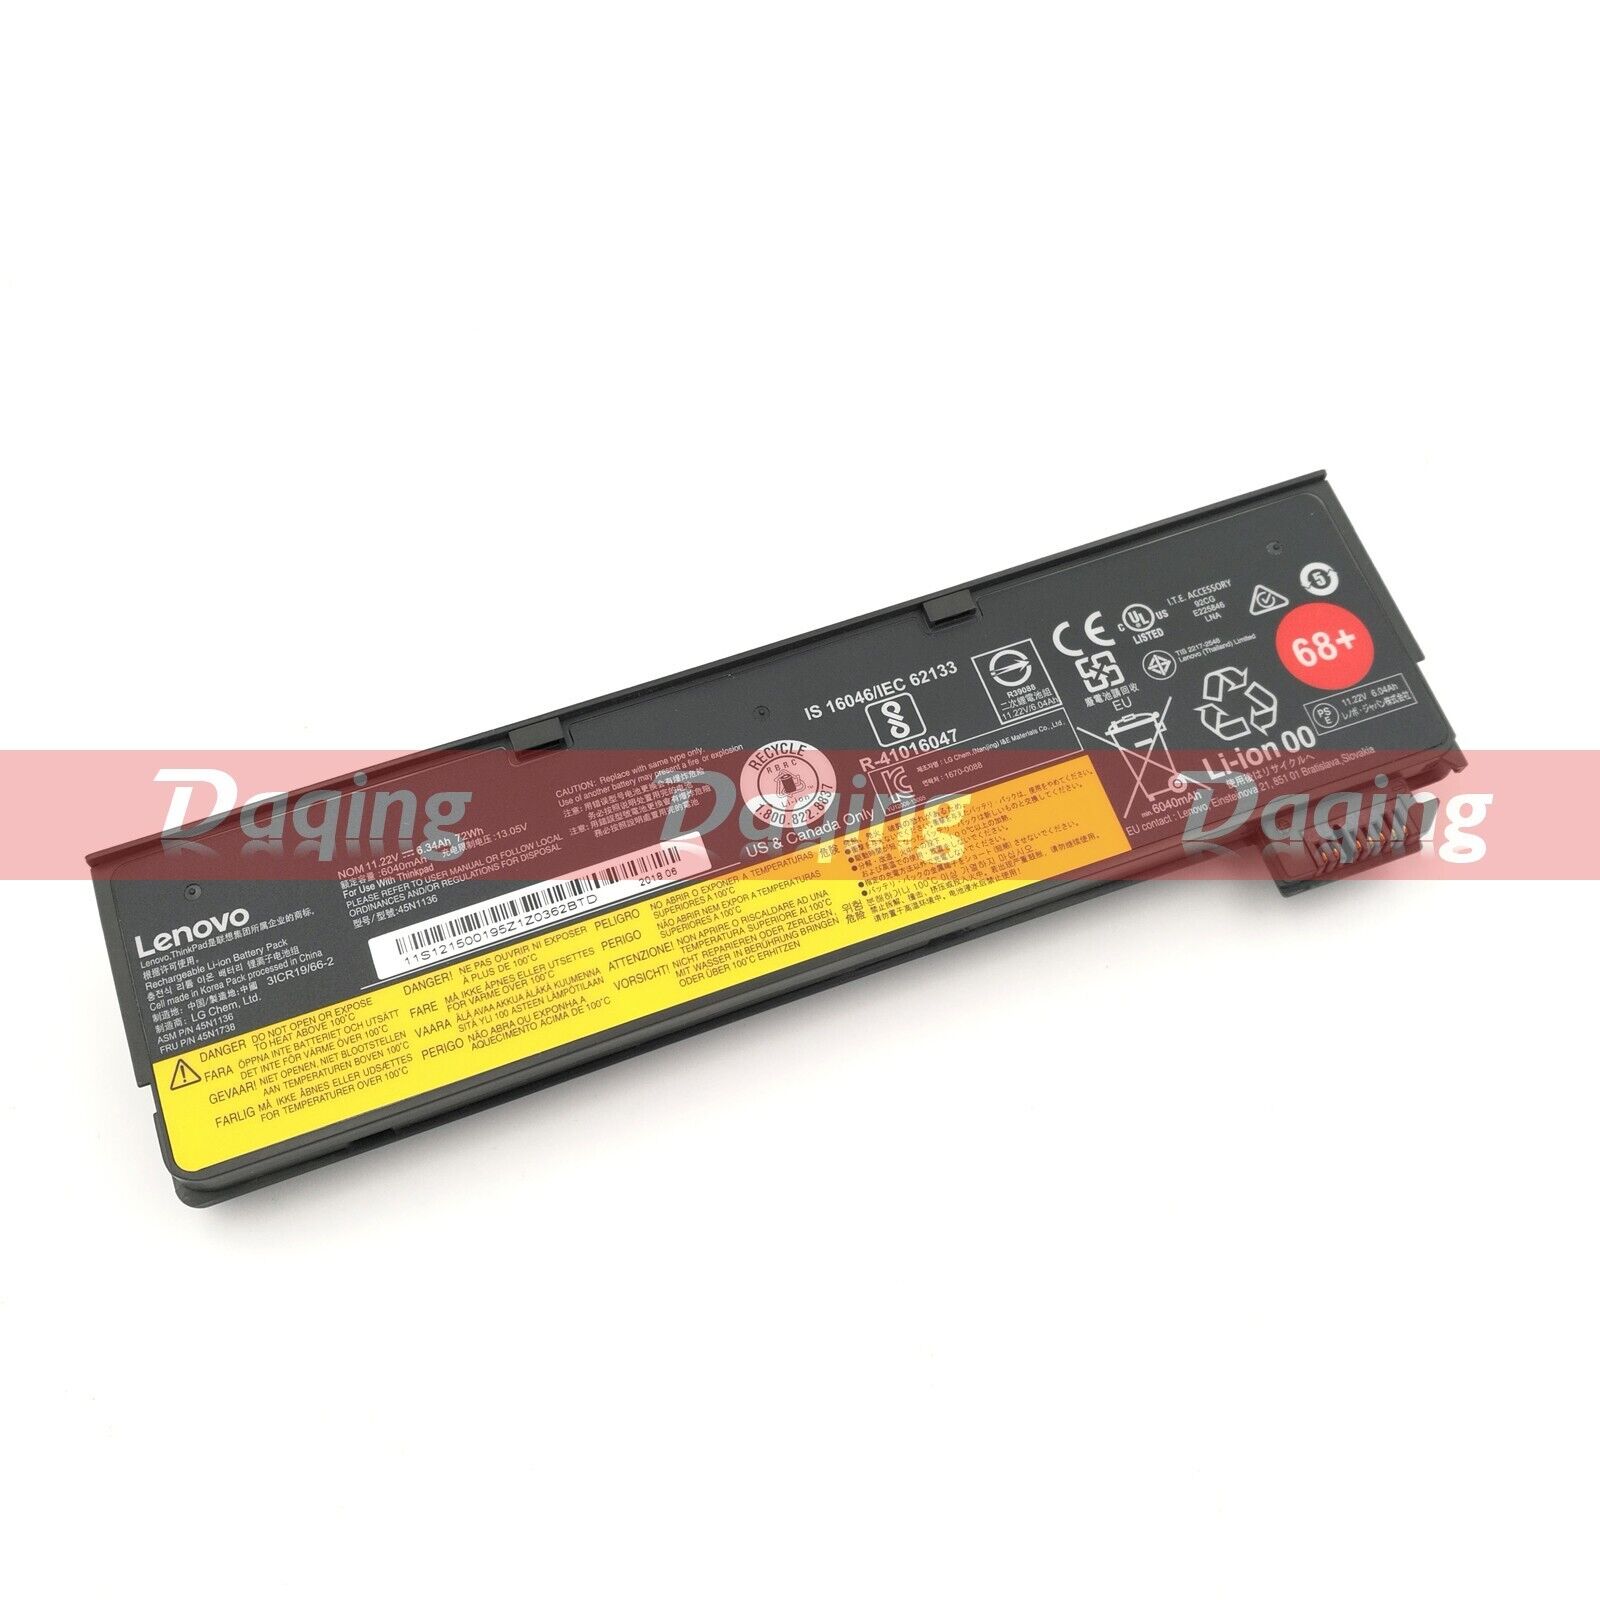 Original 68+ 72Wh Battery for Lenovo ThinkPad X240 X250 T450 T440 T440s 45N1136 